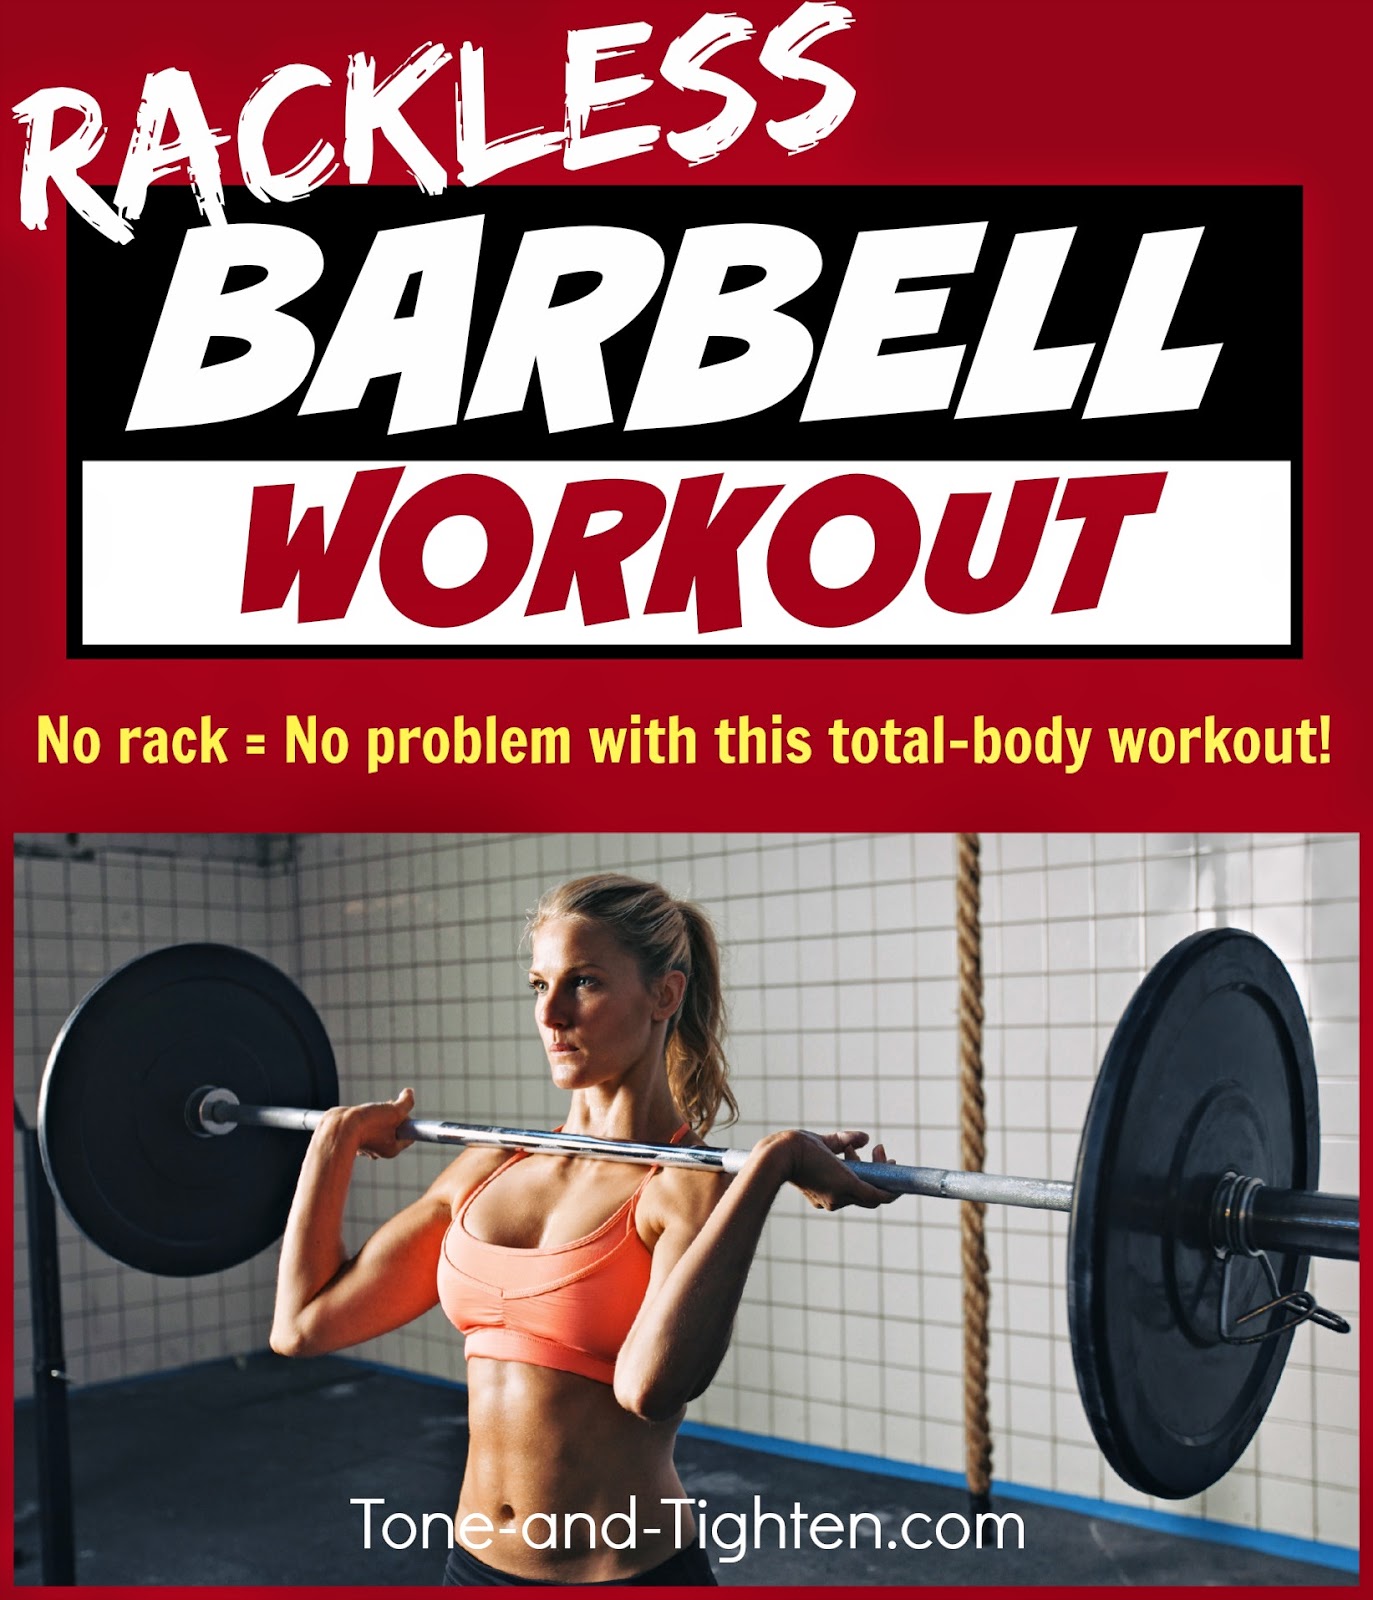 Total body barbell workout – No rack required! Part of the “What I Worked Wednesday” series